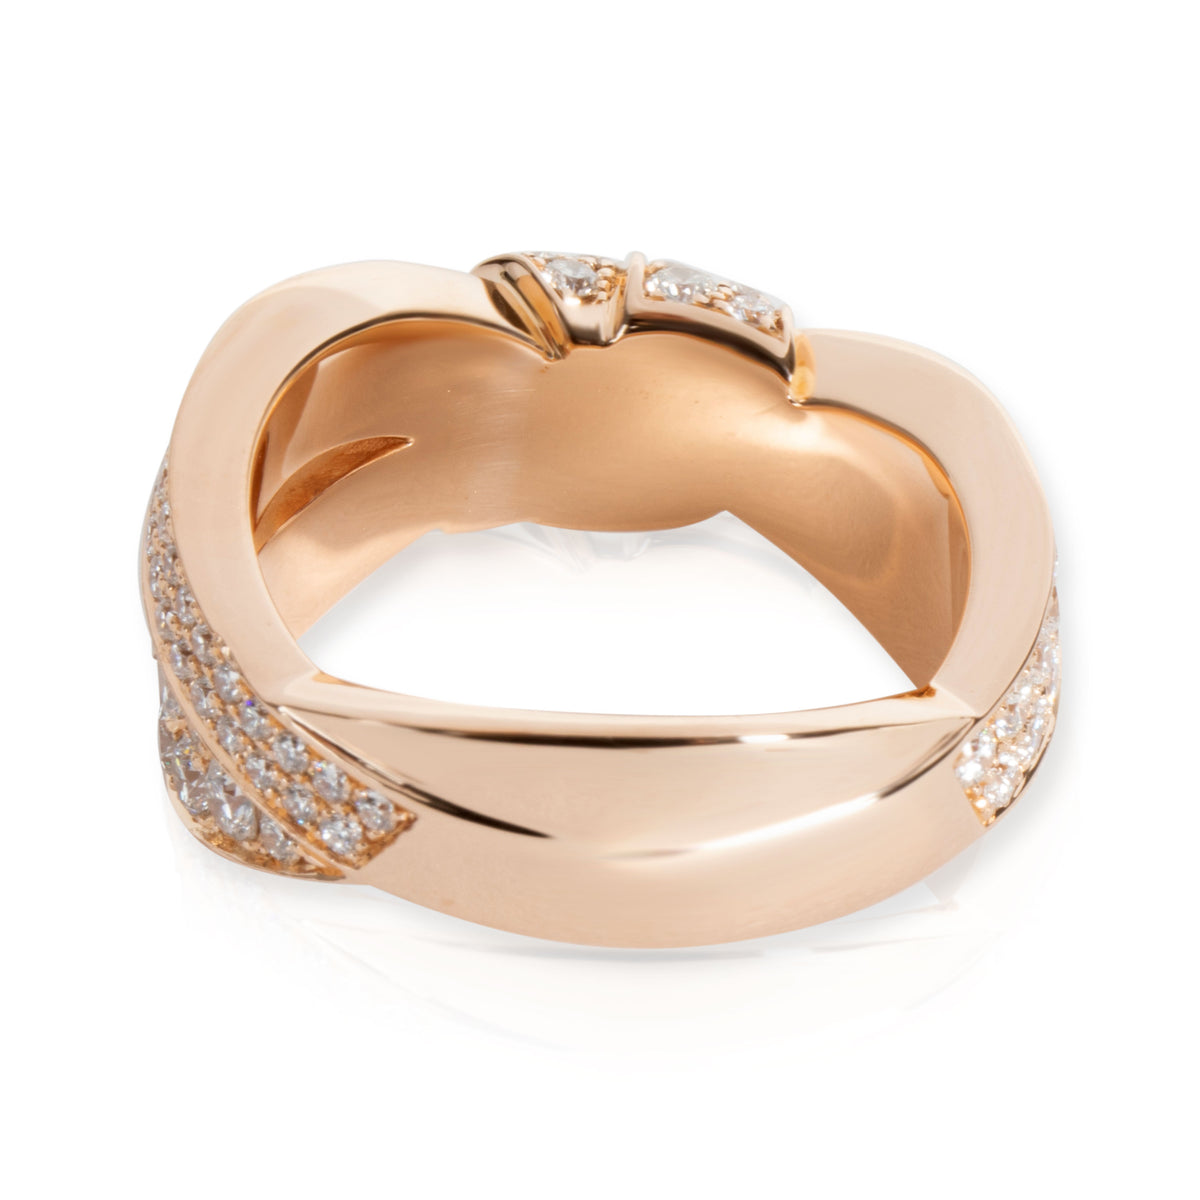 Chaumet Liens Seduction Diamond Ring in 18K Pink Gold 3.50 CTW